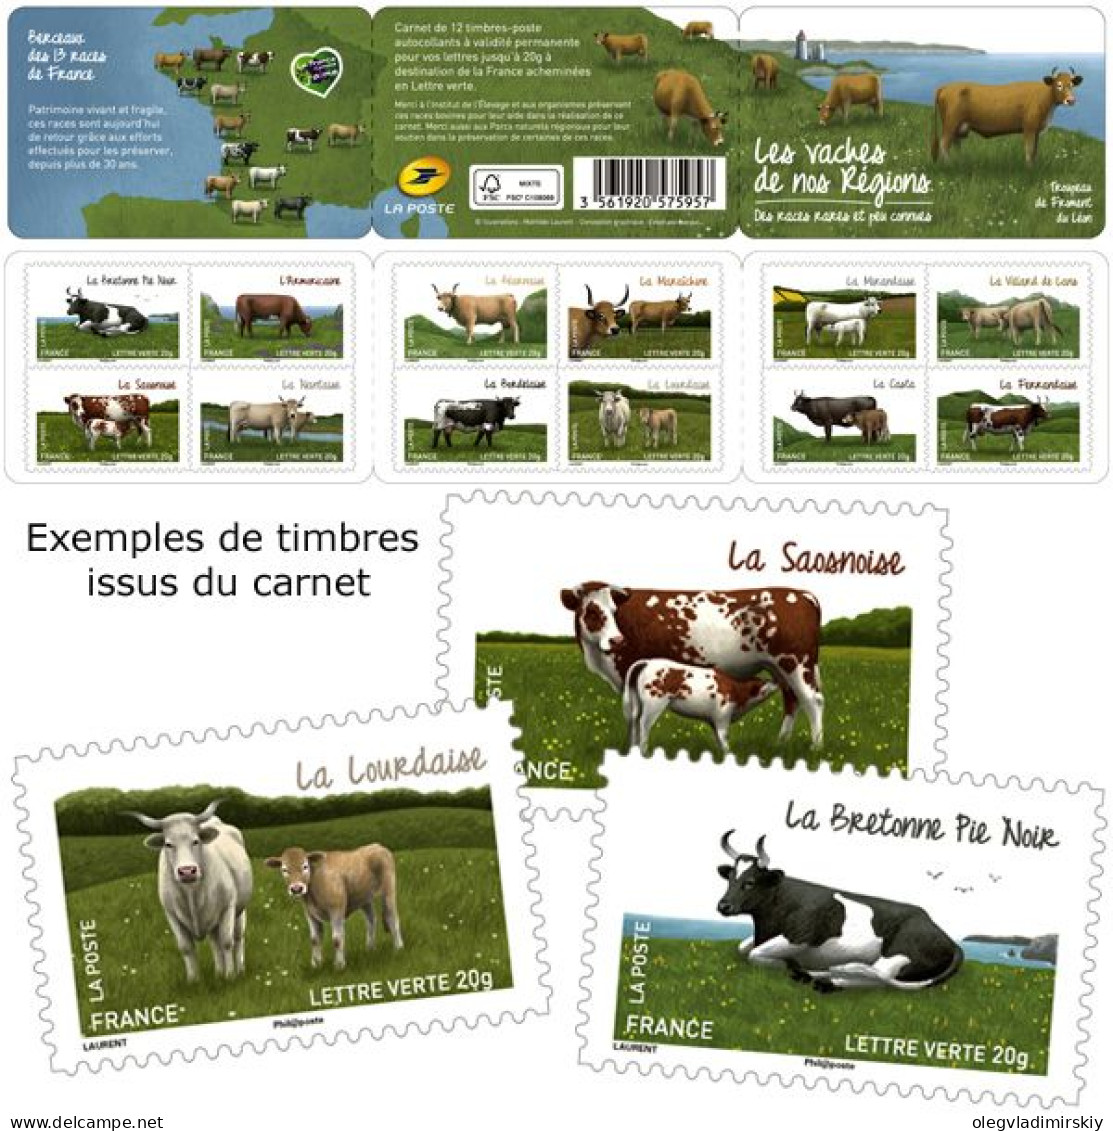 France 2014 Cows Breeds Set Of 12 Stamps In Booklet MNH - Mucche